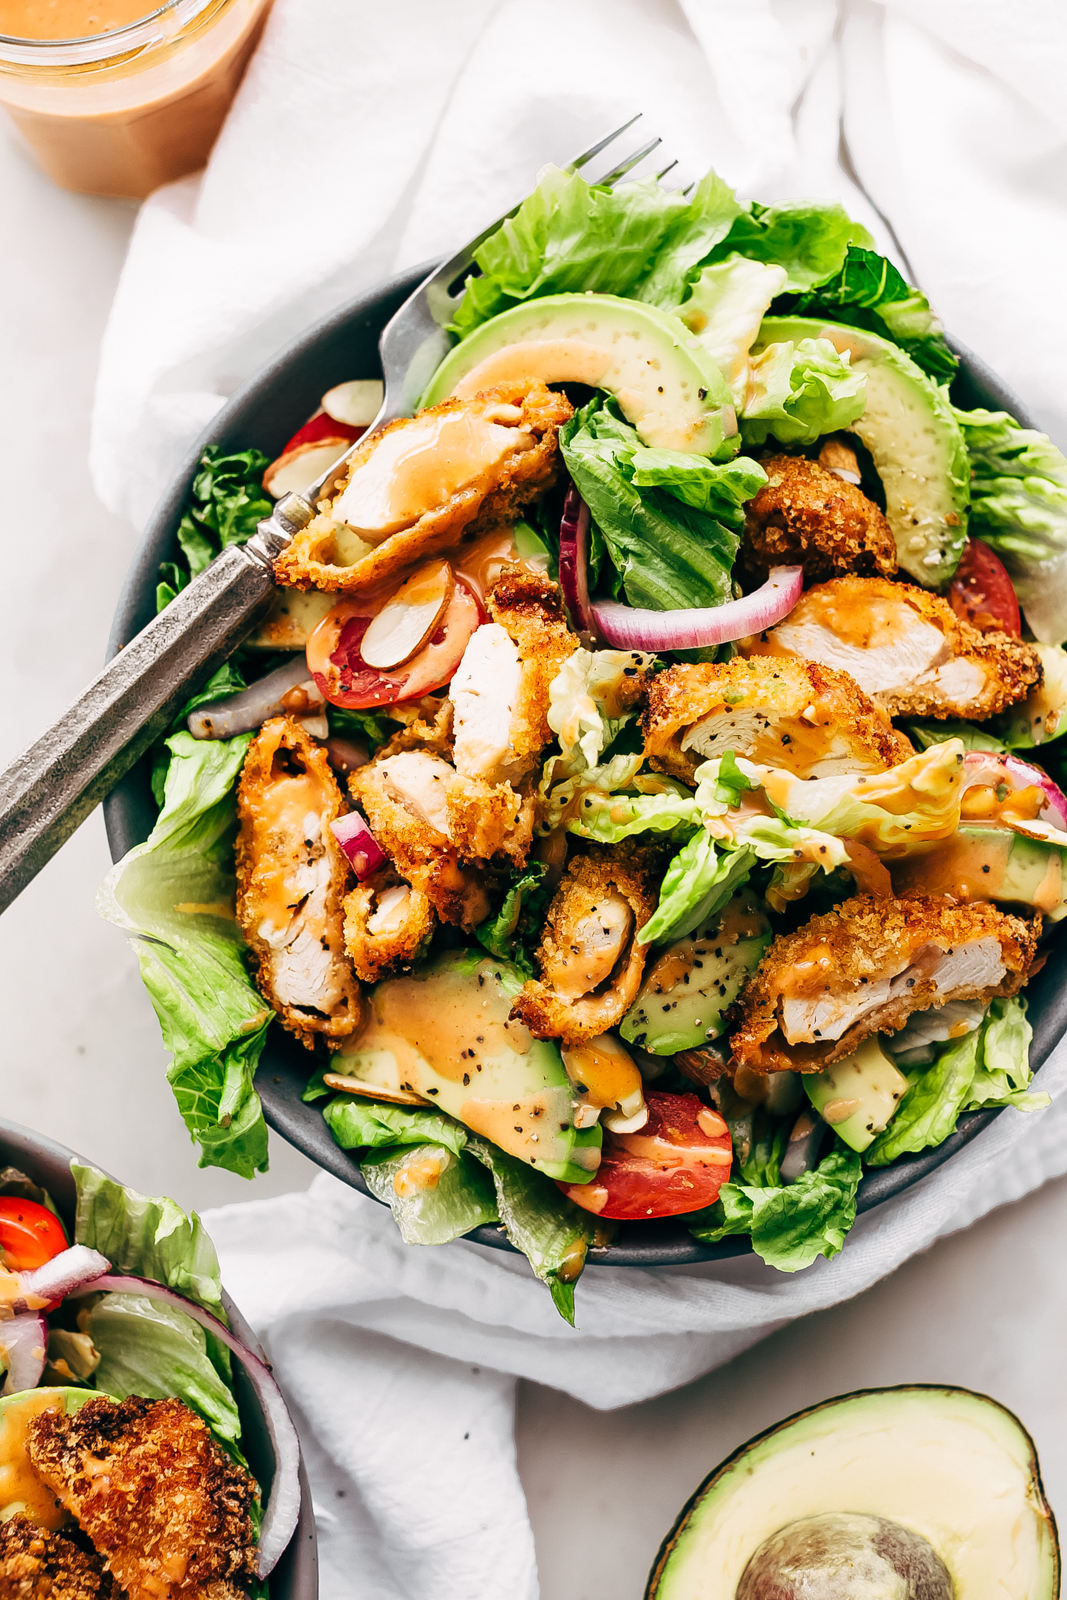 Baked crispy chicken breast with salad 391 cal